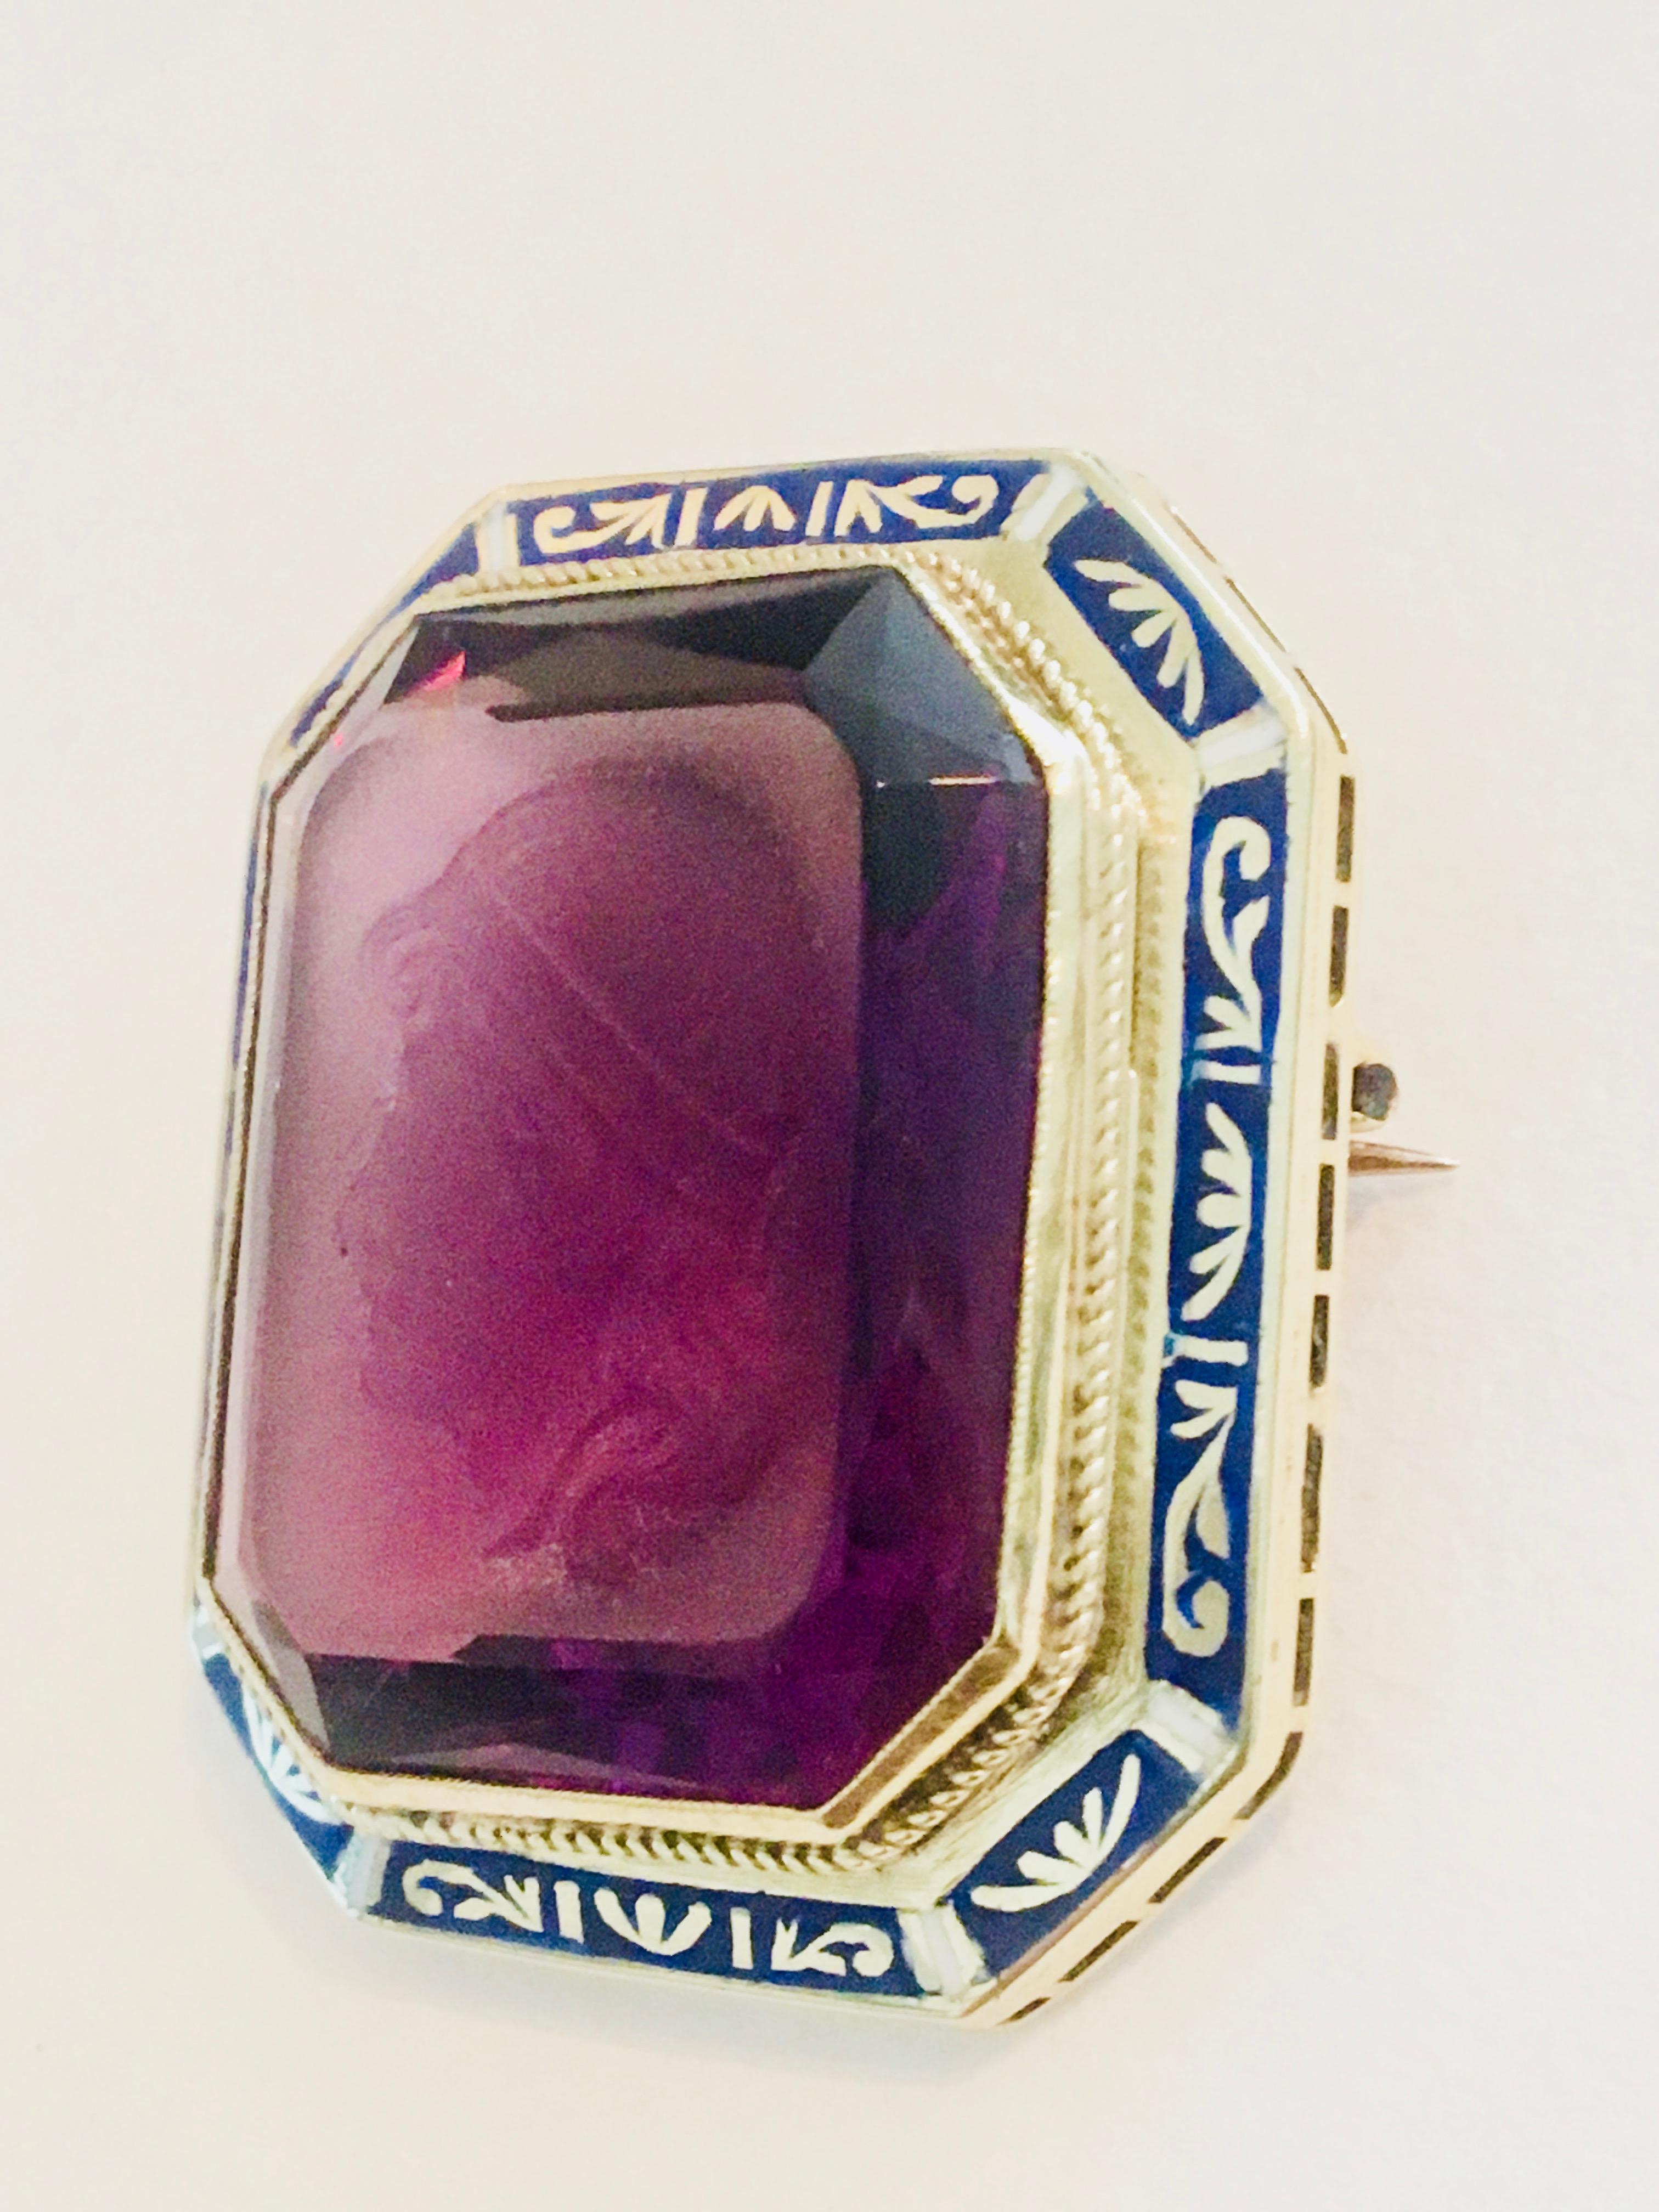 Intaglio Amethyst Pendant/Pin 14k Yellow Gold with Cobalt Blue and White  Enameled Bezel with a Grecian Style profile.  

Amethyst stone dimensions -  21x26x11